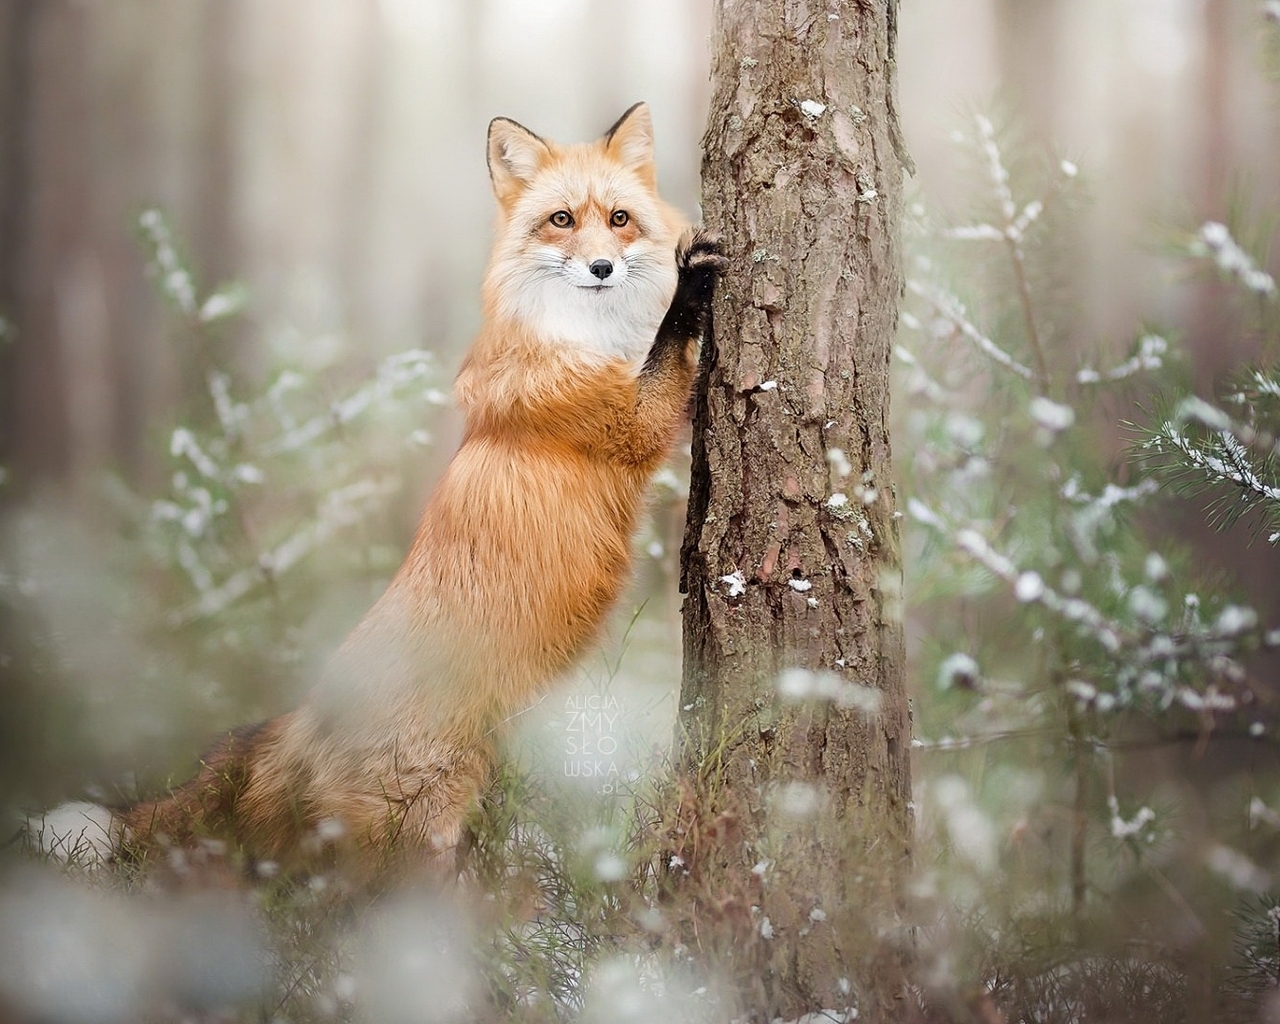 Image: Red, Fox, winter, forest, tree trunk, spruce, rests